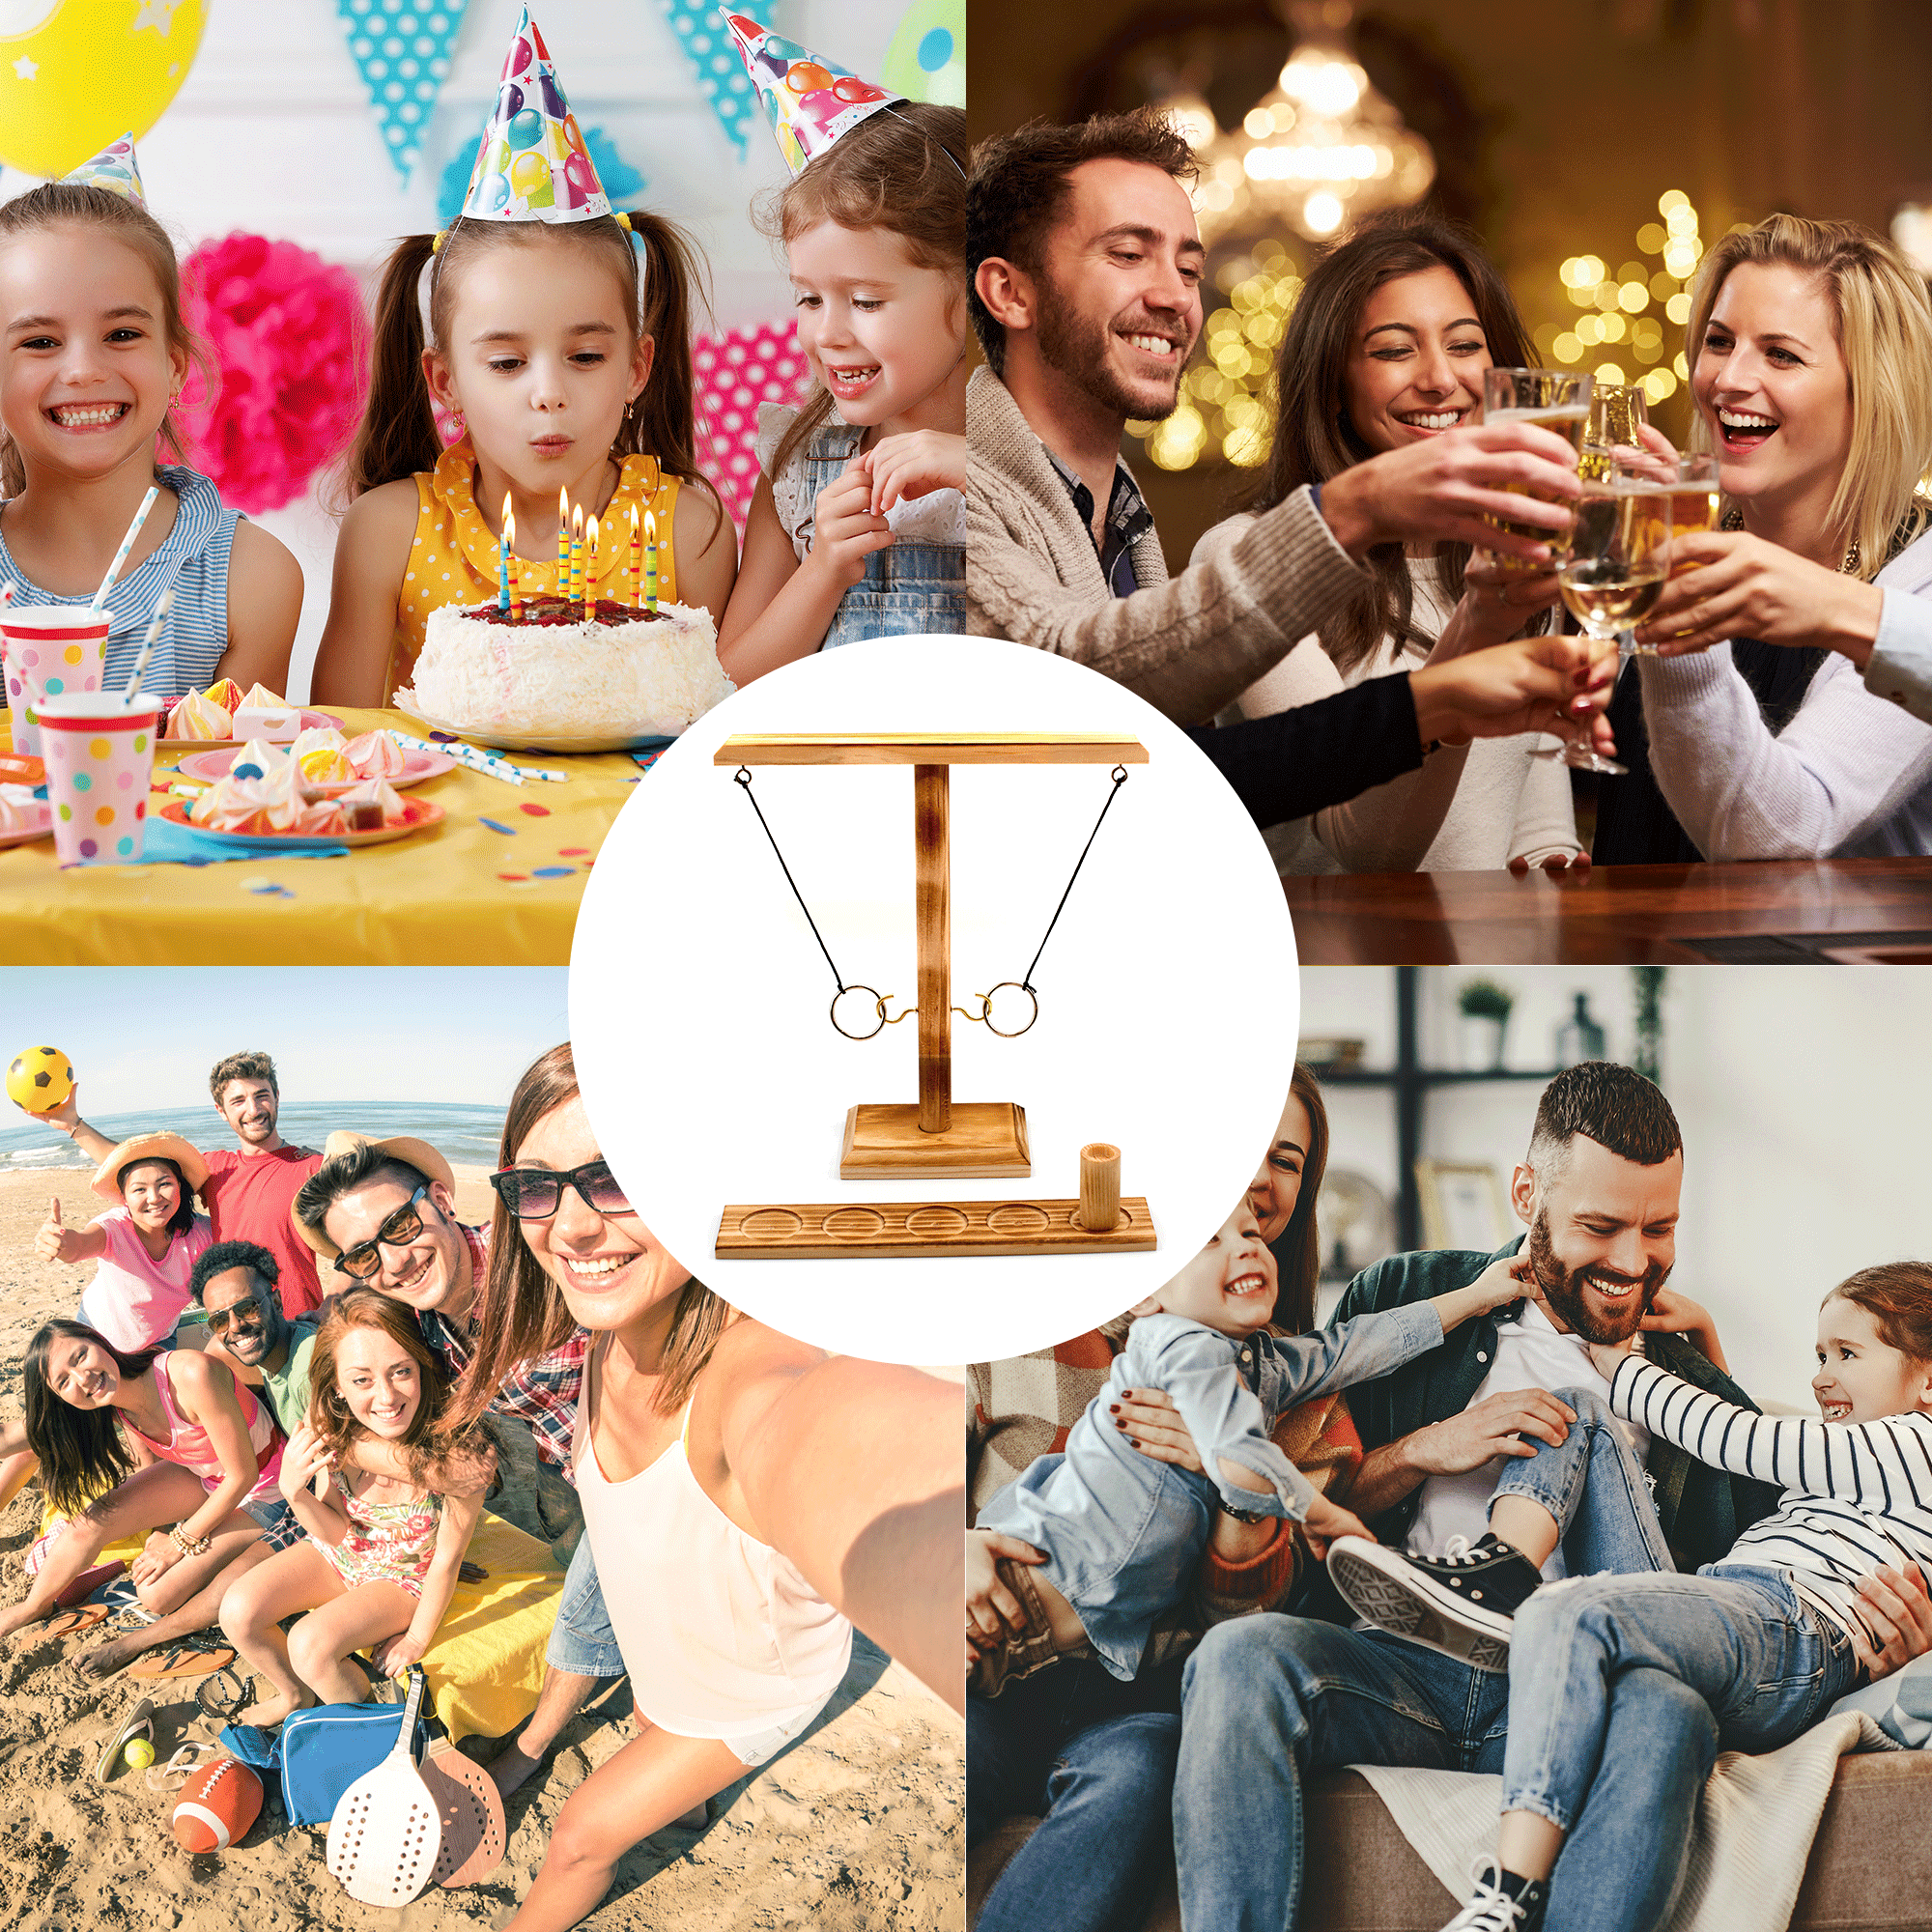 Barbecue Ship Wooden Handmade Hook and Ring Game Outdoor Or Indoor Party Backyard Camping Ring Toss Game Kids and Adults Family Interactive Up to 4 Players 